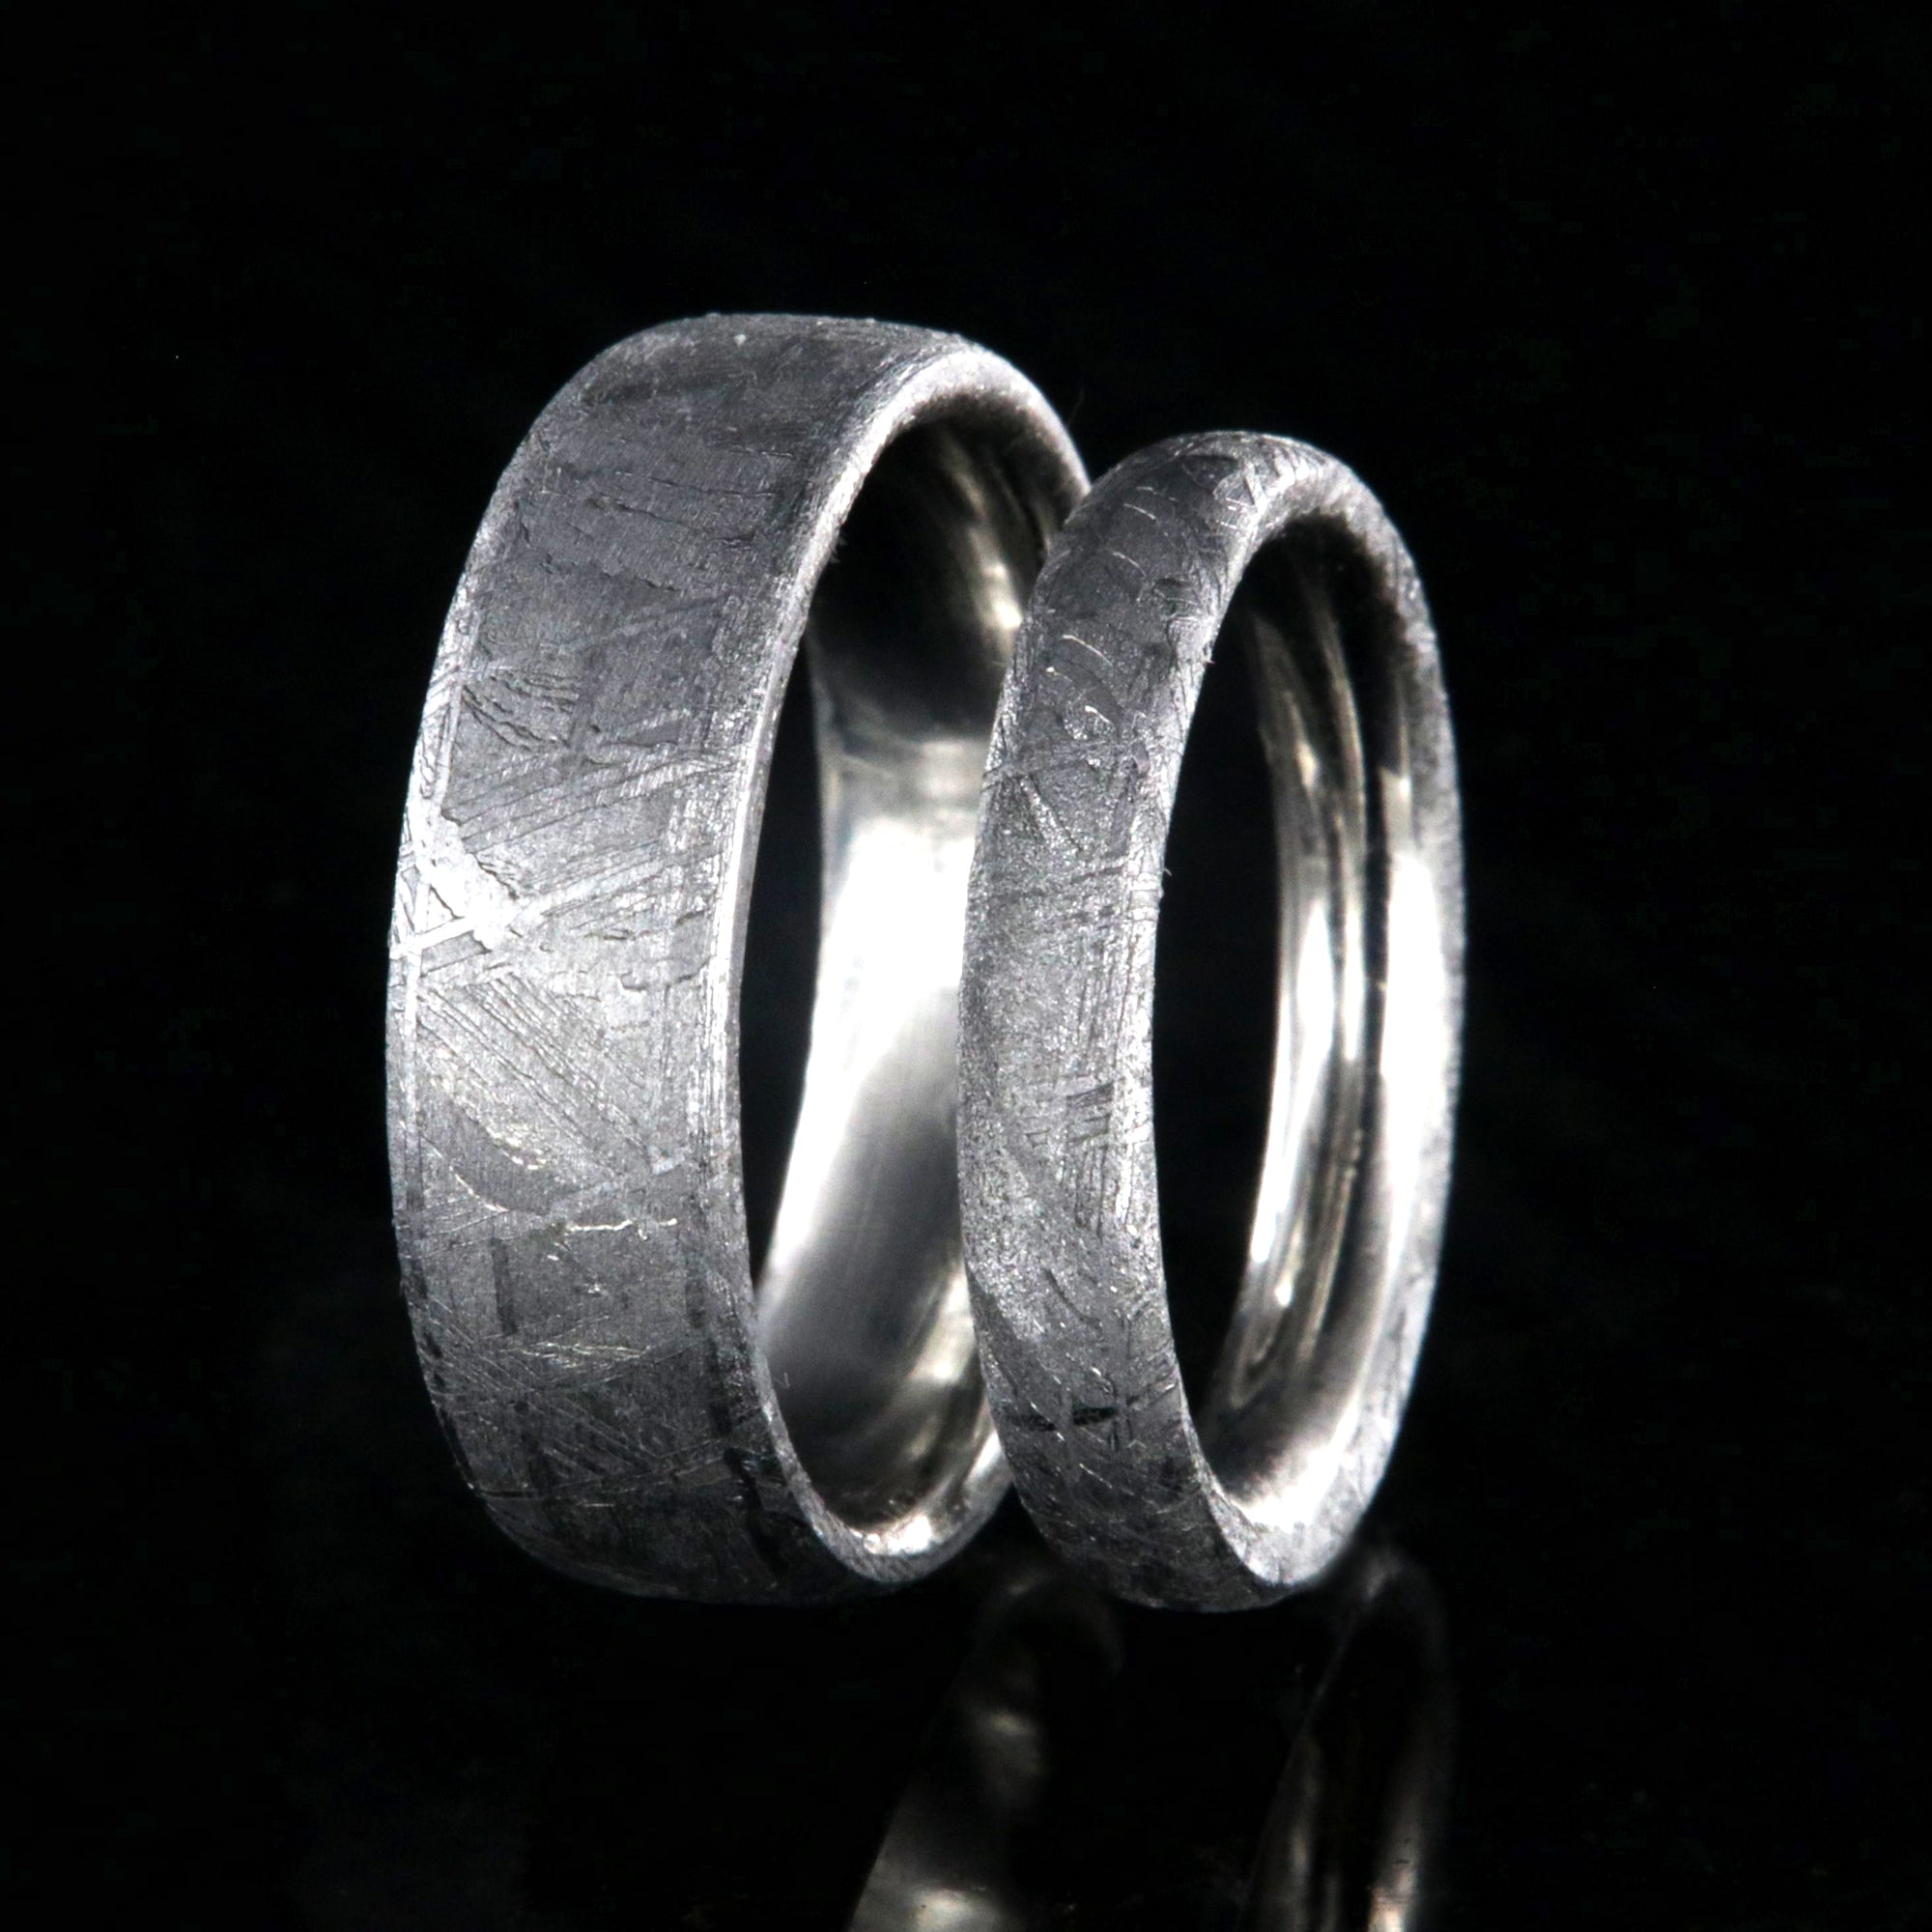 His and her ring set with 6mm wide Gibeon meteorite band and matching 3mm wide meteorite band